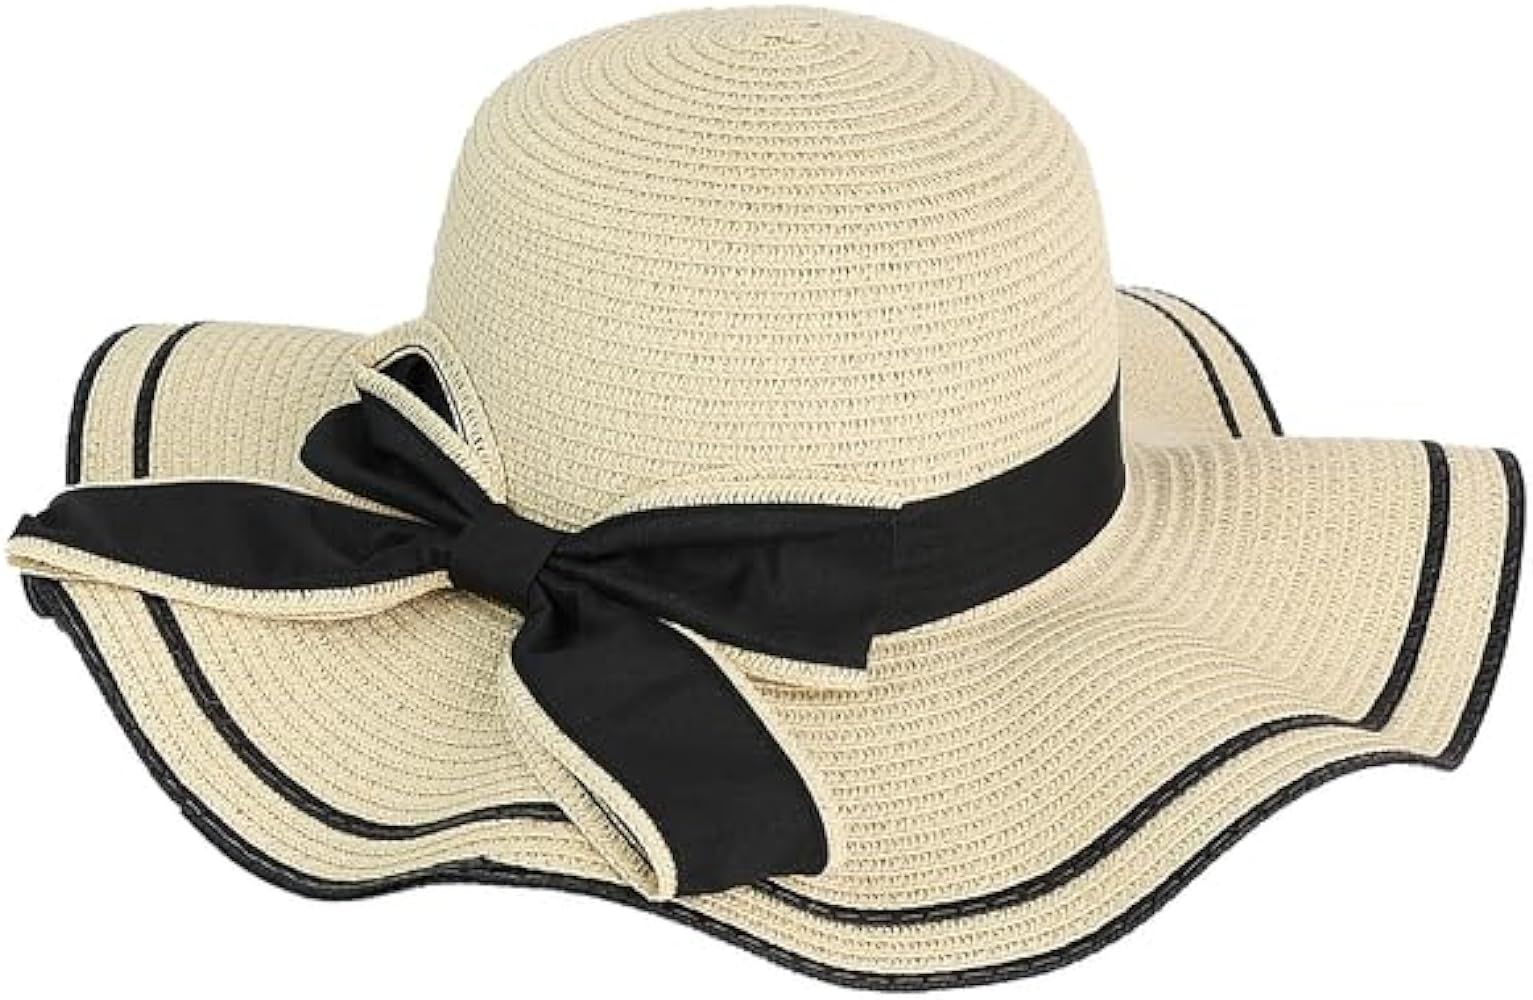 Arctic Barrier Chic Scallop Floppy Straw Hat with Bow: Perfect Summer Accessory! | Amazon (US)